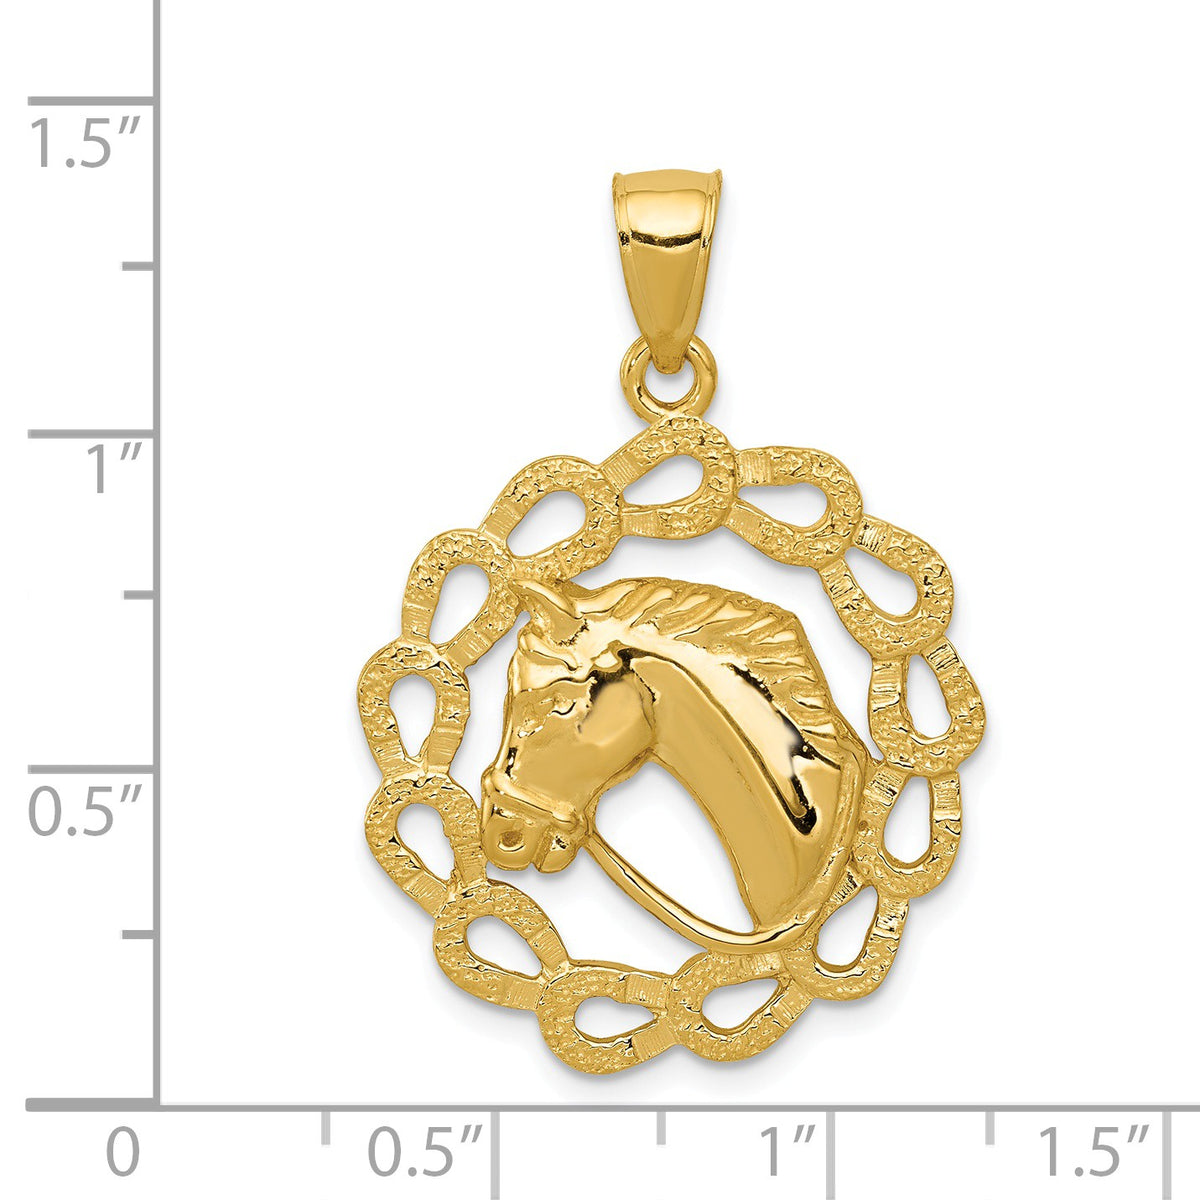 Alternate view of the 14k Yellow Gold Horse Head and Horseshoe Wreath Pendant, 24mm by The Black Bow Jewelry Co.